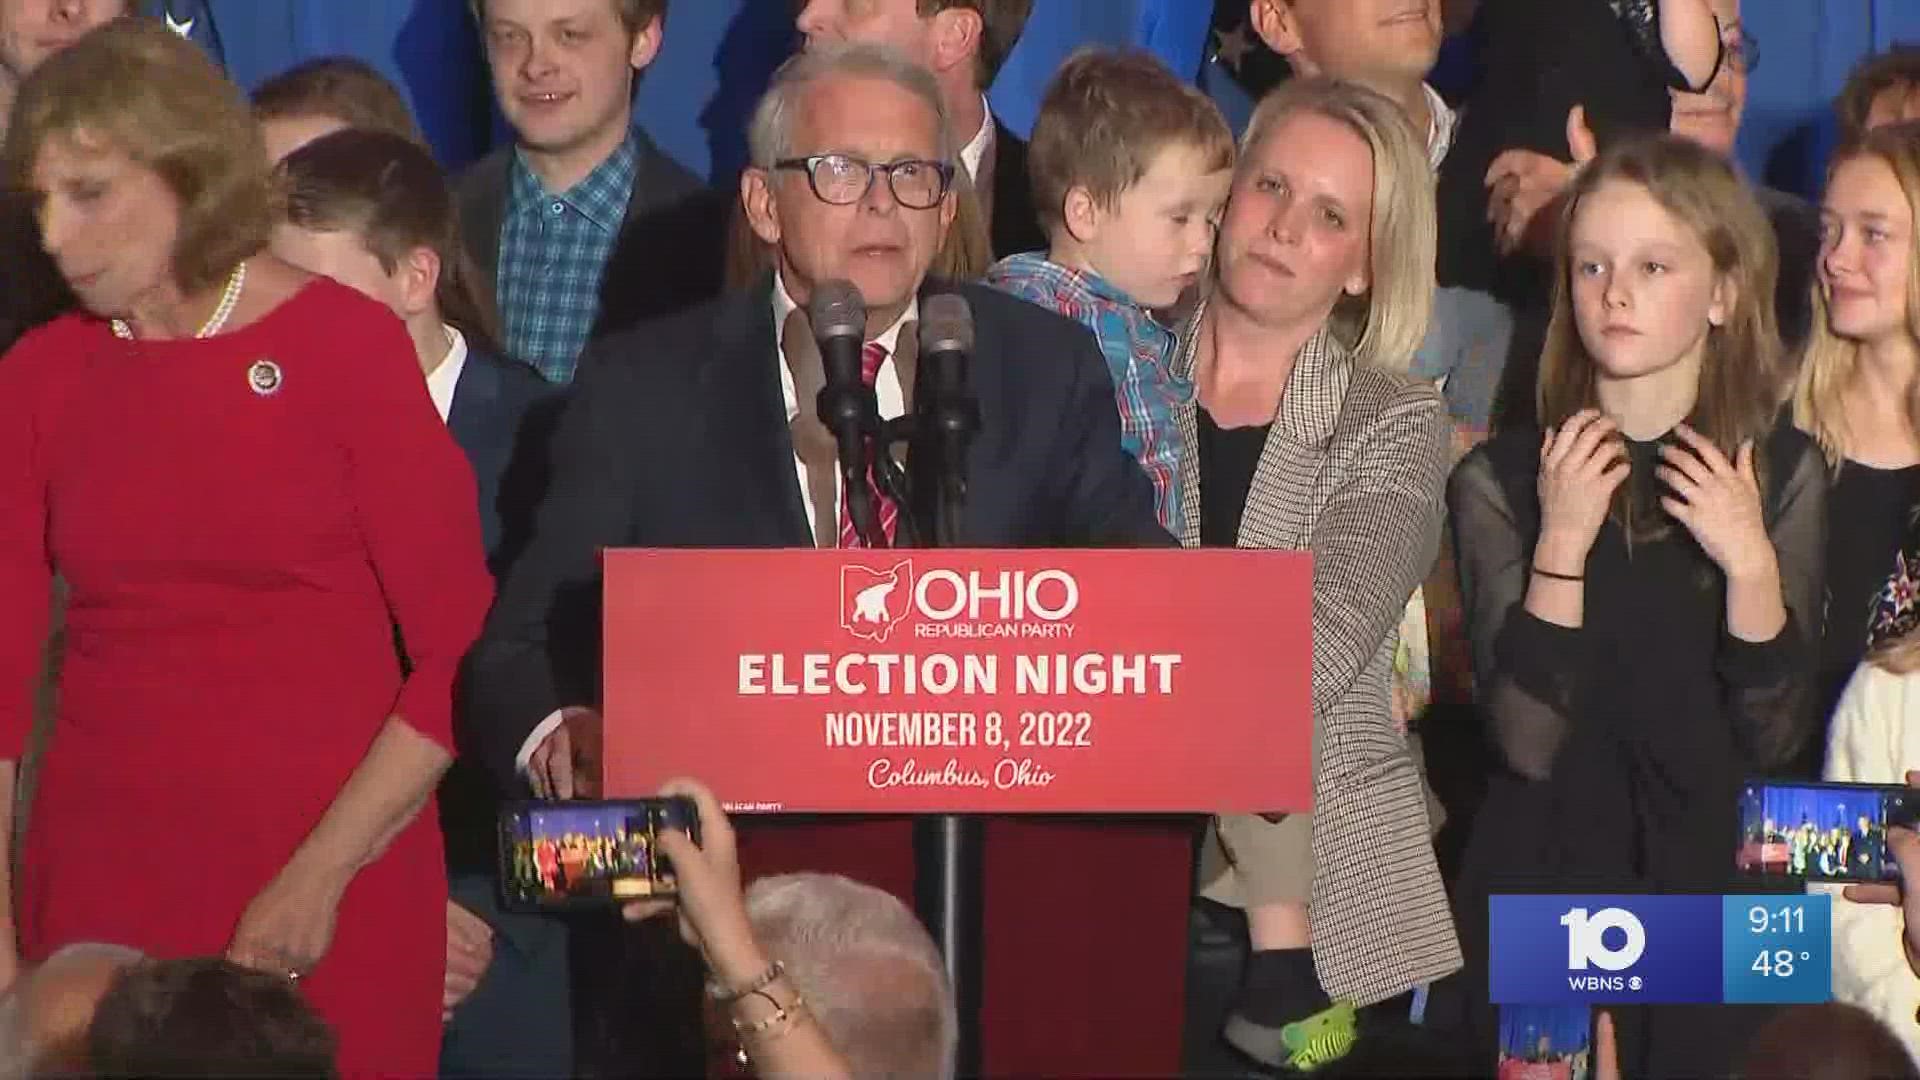 DeWine gained a second term as he defeated challenger Nan Whaley.